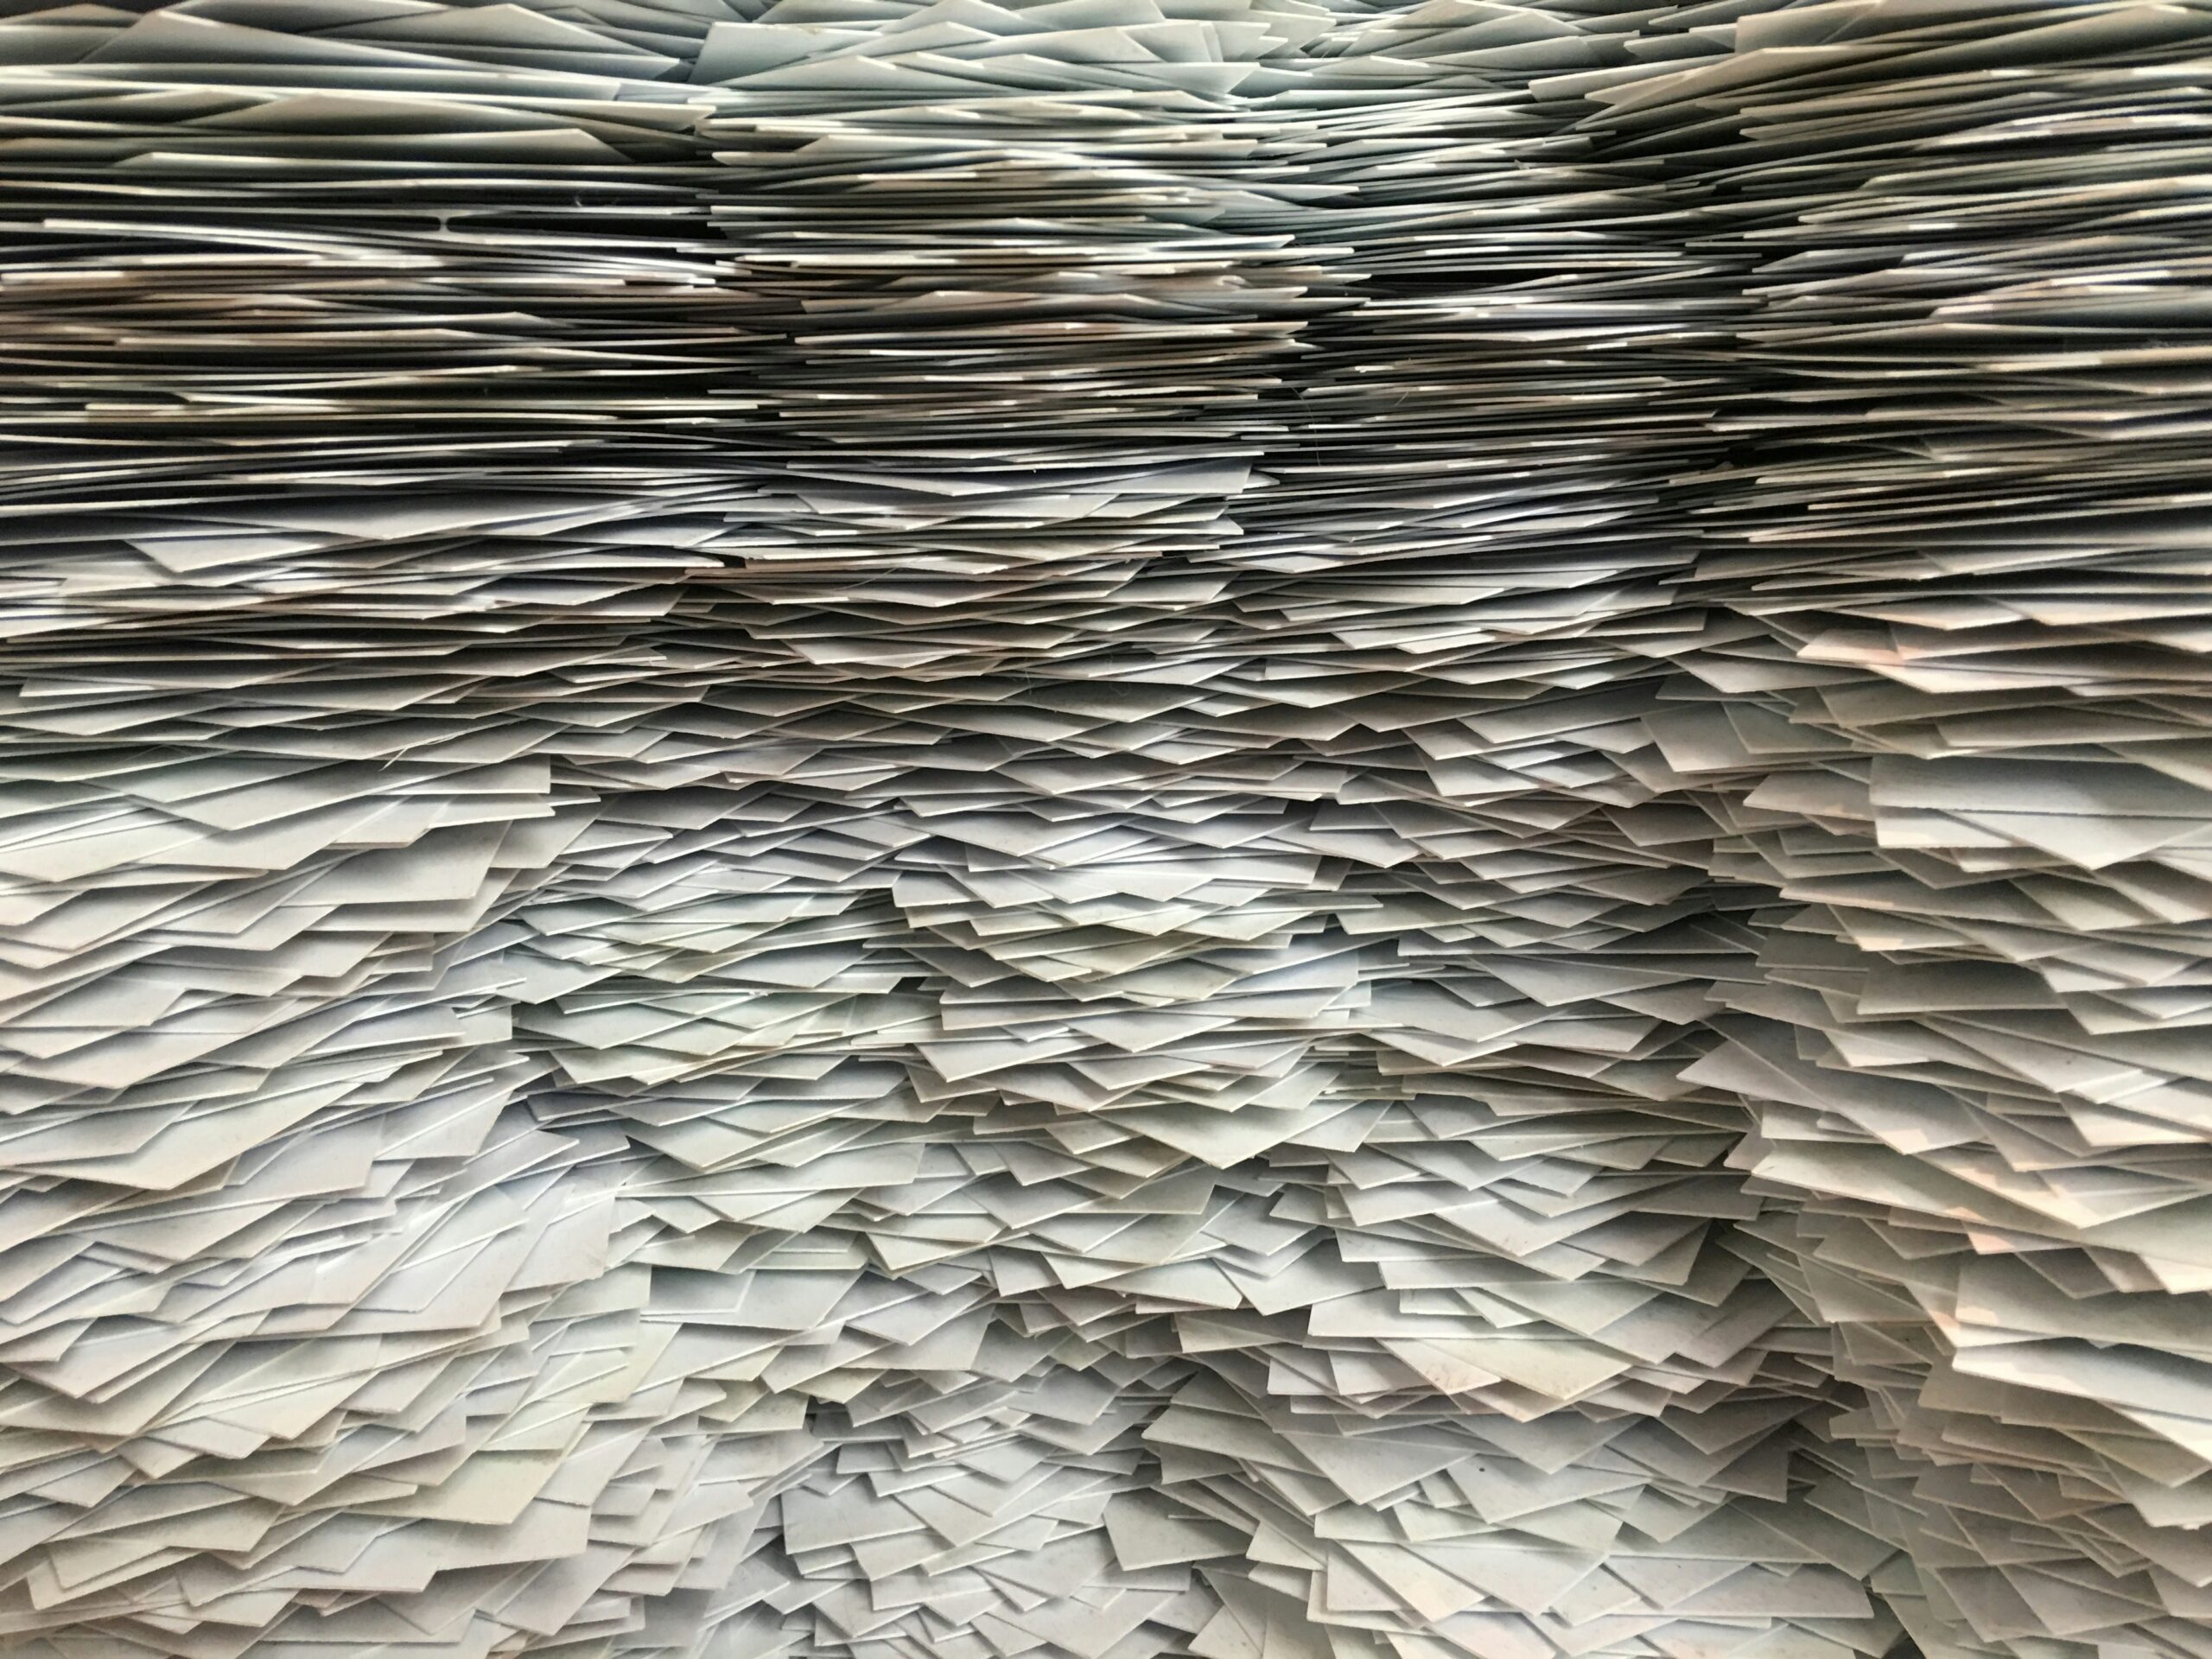 Tax Time Triage: 5 Ways to Manage Paper Clutter's featured image